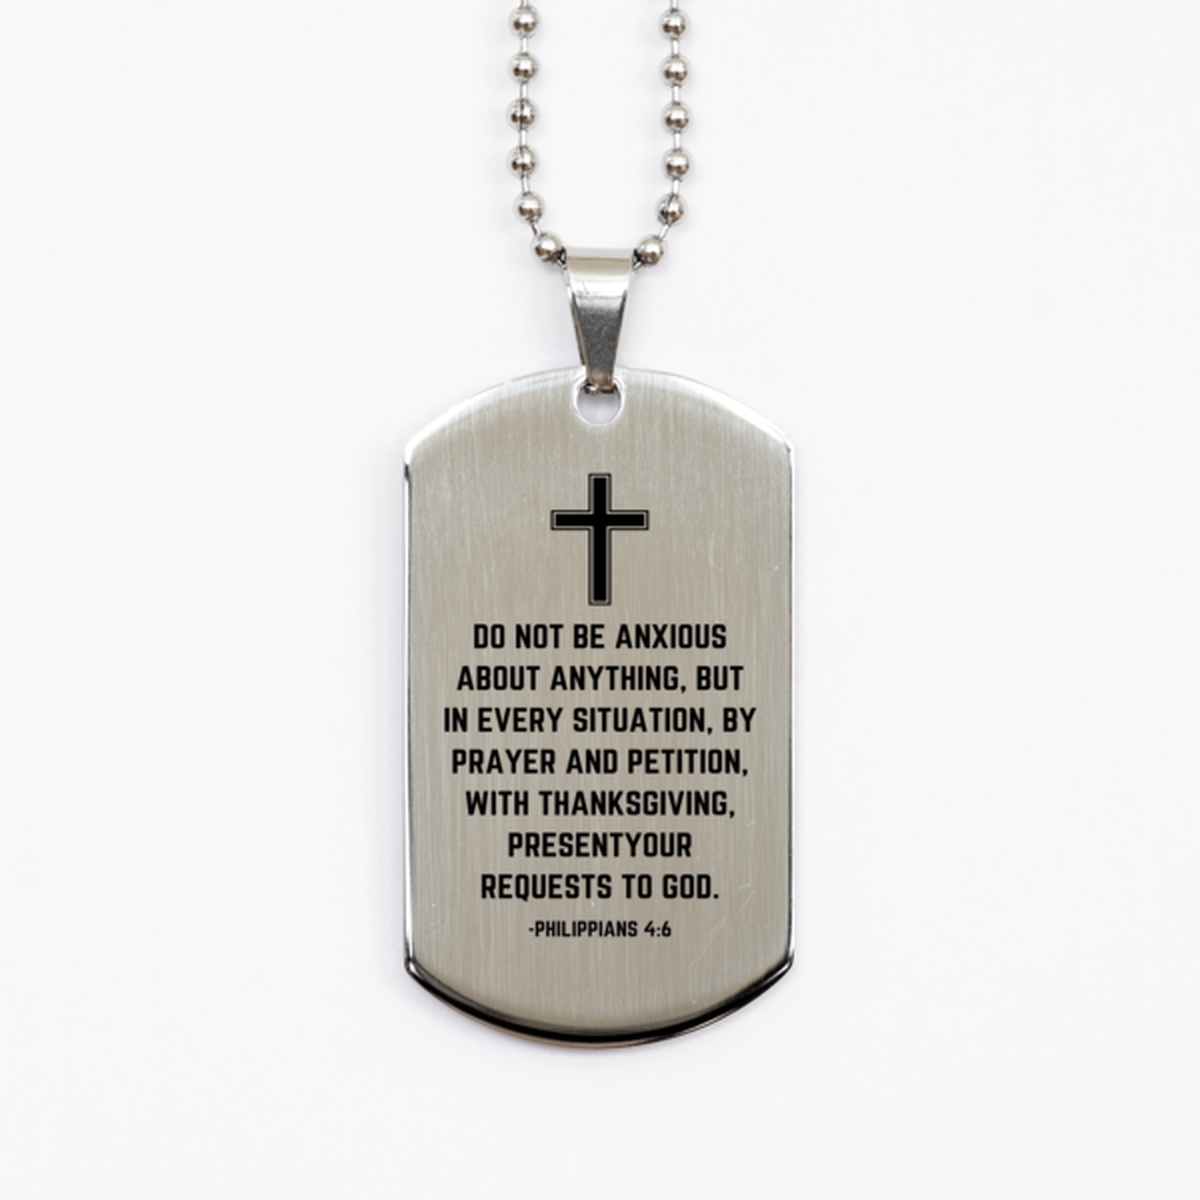 Baptism Gifts For Teenage Boys Girls, Christian Bible Verse Silver Dog Tag, Do not be anxious about anything, Confirmation Gifts, Bible Verse Necklace for Son, Godson, Grandson, Nephew